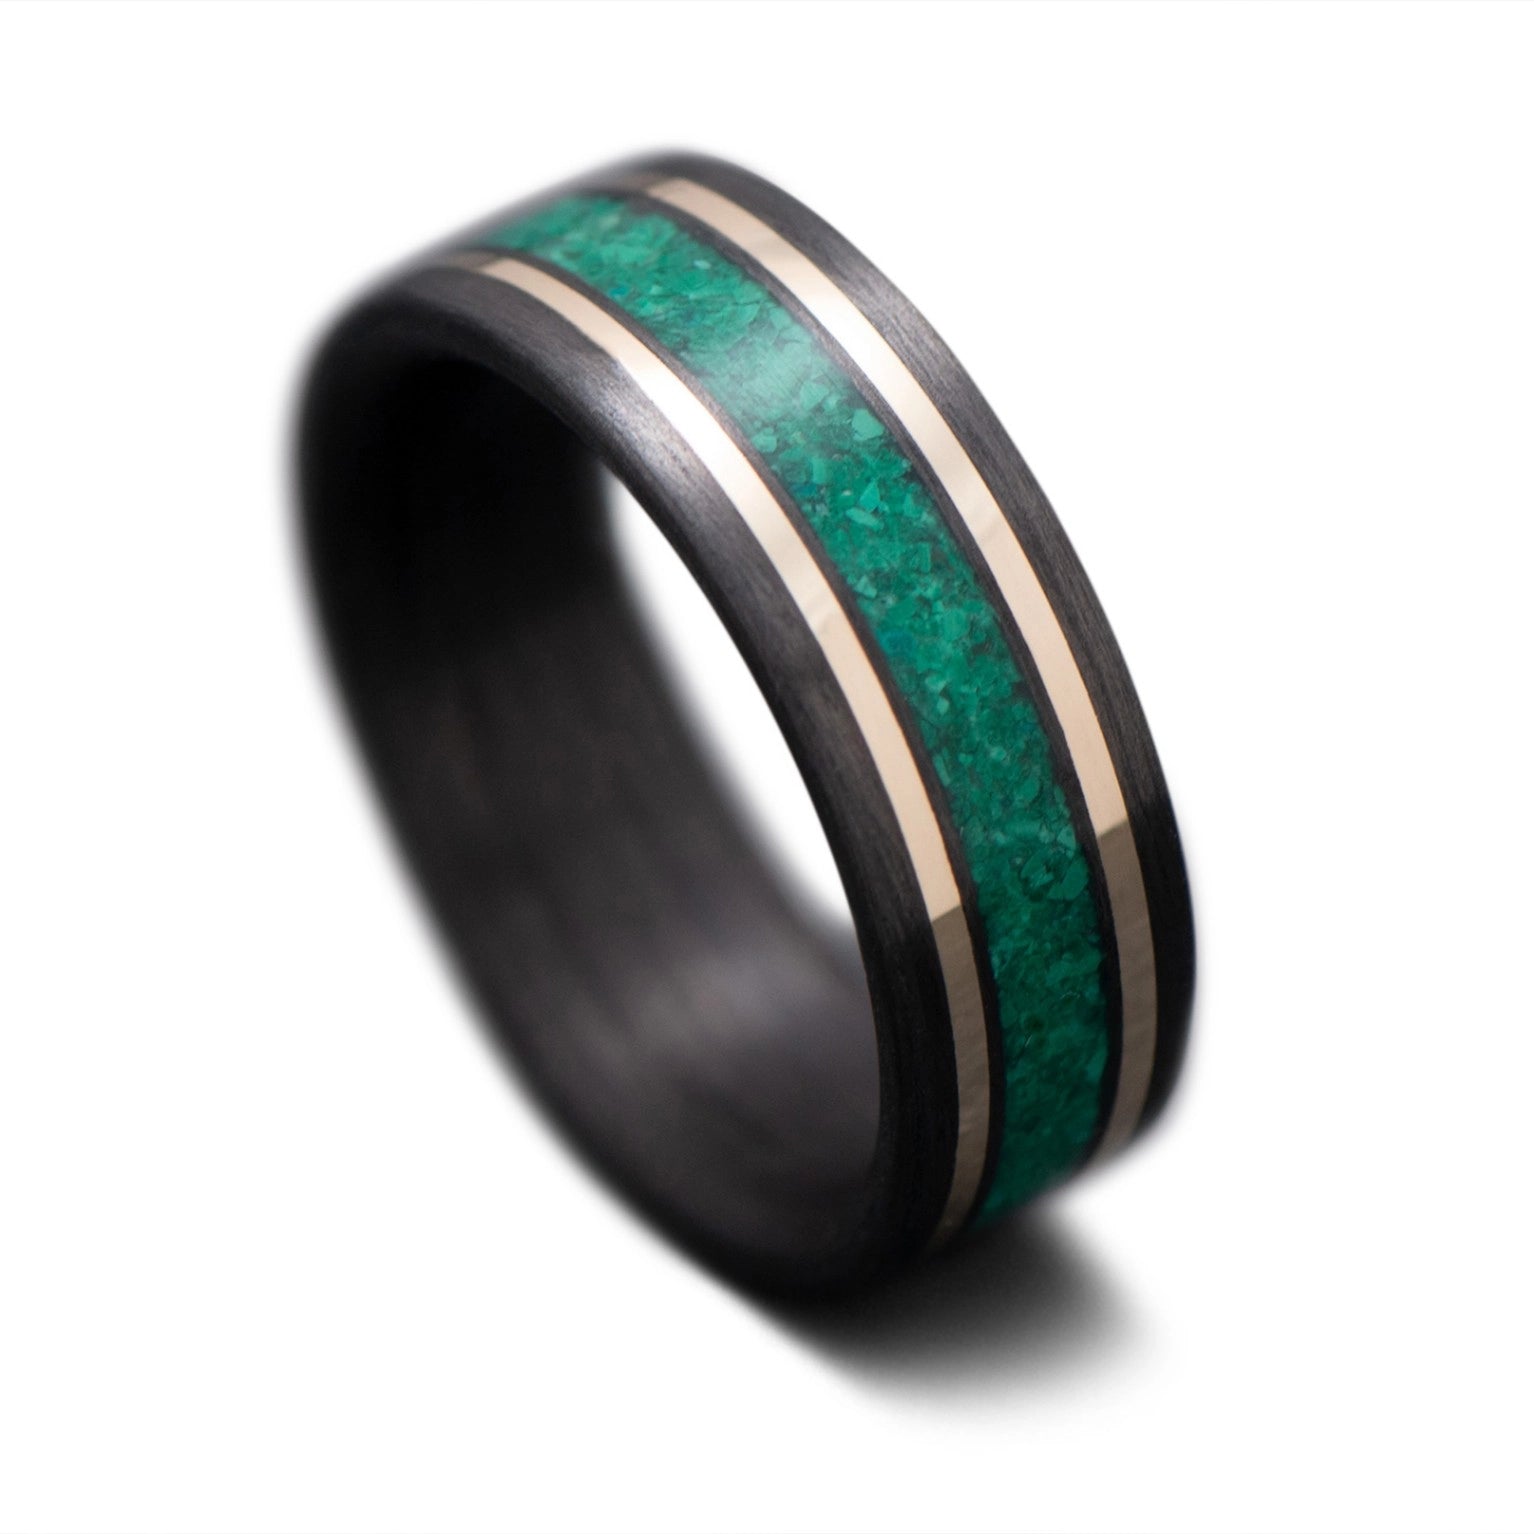 CarbonFiber Ring with 14K Gold and Malachite Inlays Men's Wedding Band